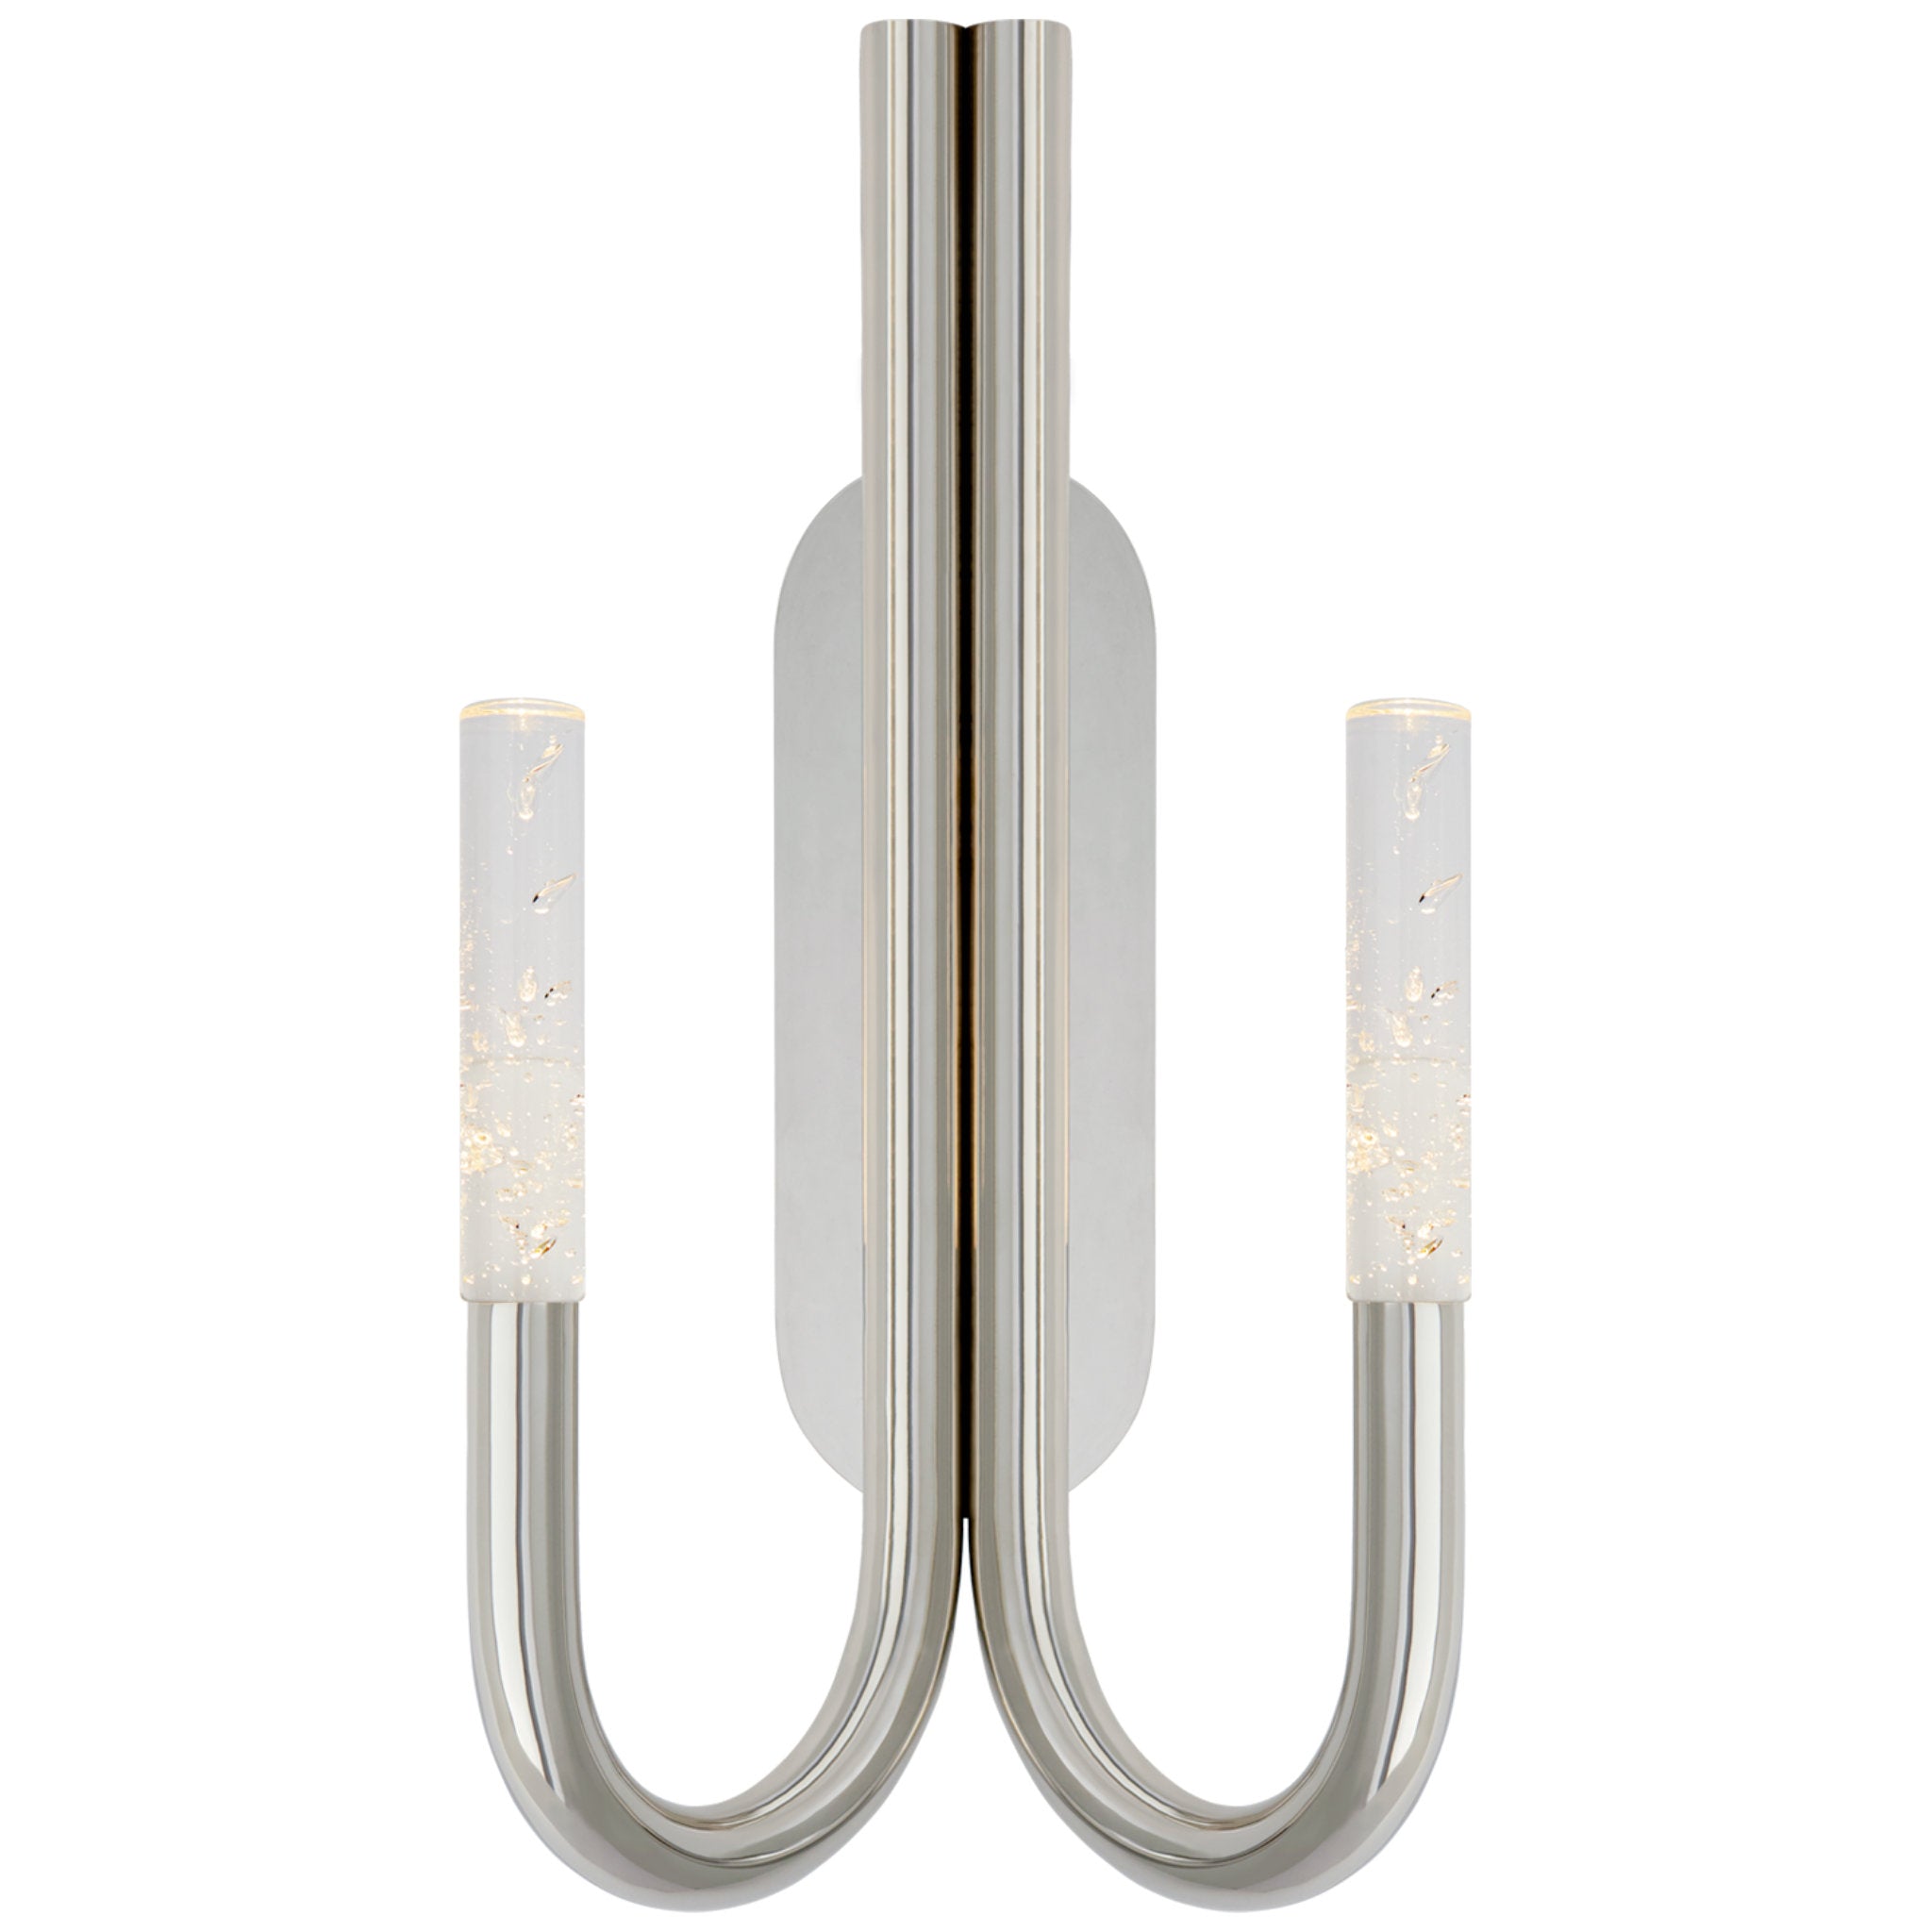 Kelly Wearstler Rousseau Double Wall Sconce in Polished Nickel with Seeded Glass